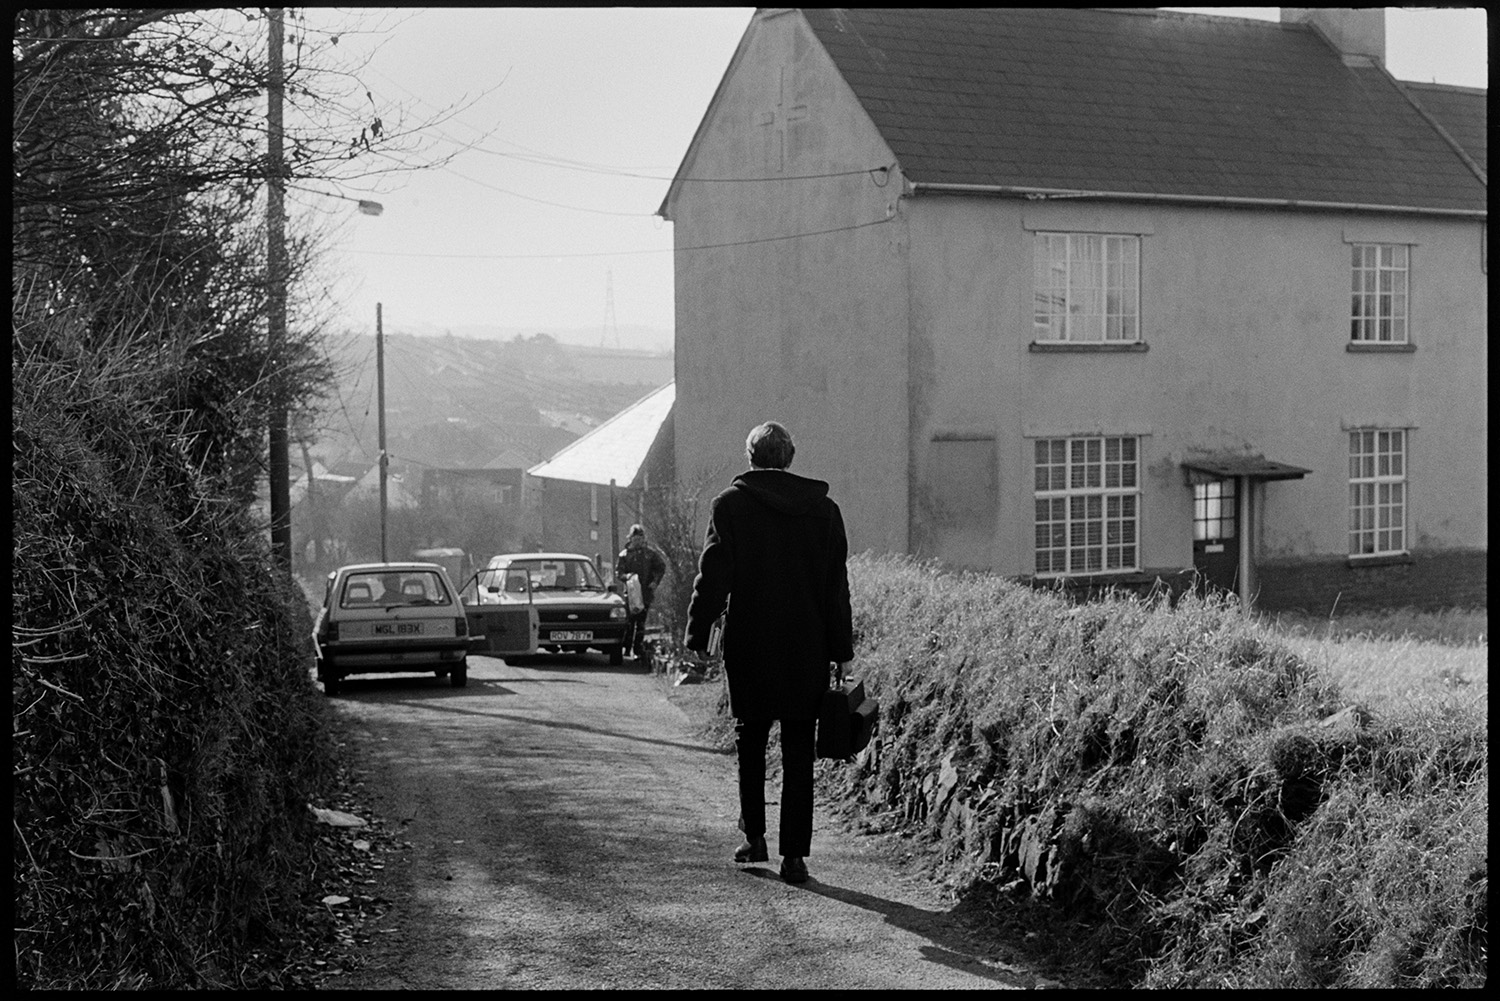 Doctor walking to see patients. 
[Doctor Richard Westcott walking along a road past a house and parked cars, on his rounds to visit patients in South Molton.]